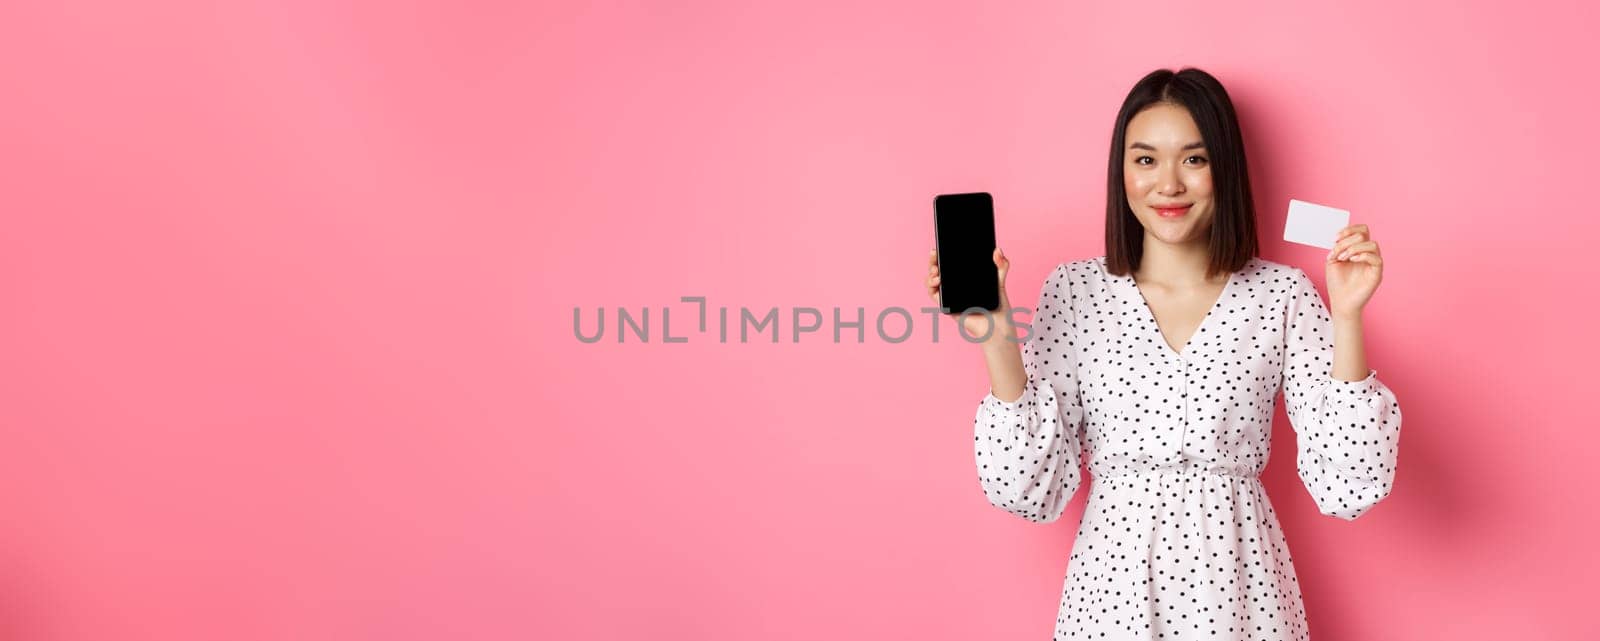 Cute asian woman shopping online, showing bank credit card and mobile screen, smiling and looking at camera, standing over pink background.